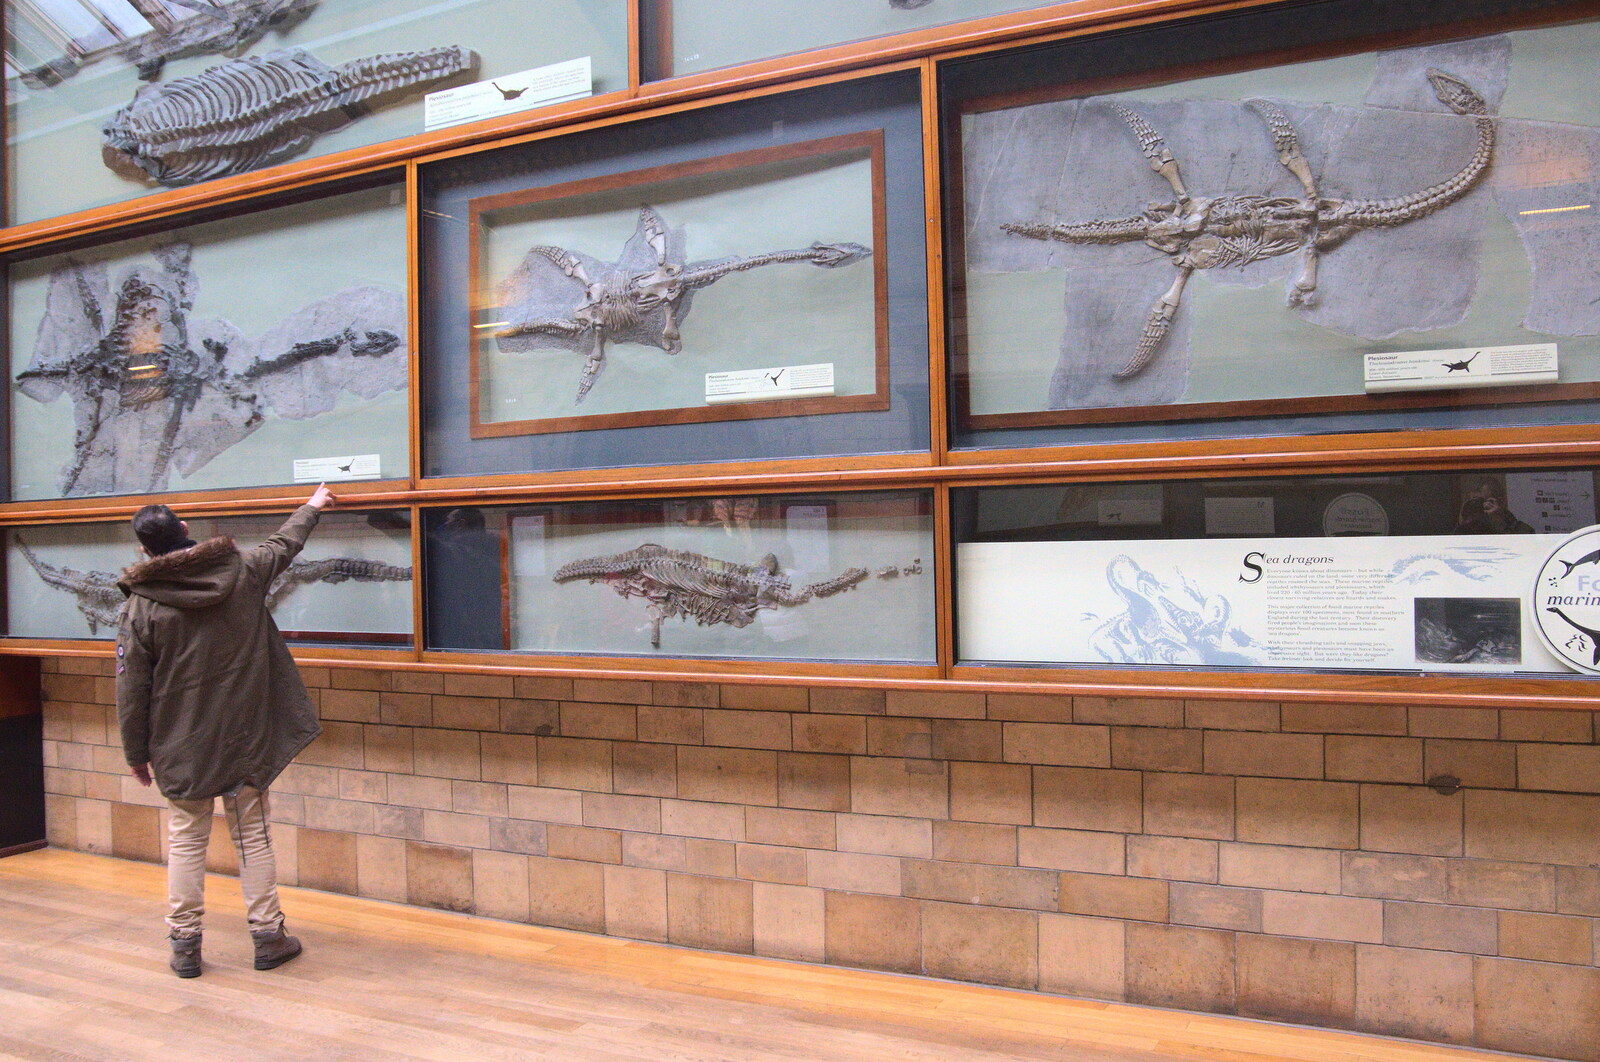 Fossil plesiosaurs on the wall from A Trip to the Natural History Museum, Kensington, London - 15th January 2022